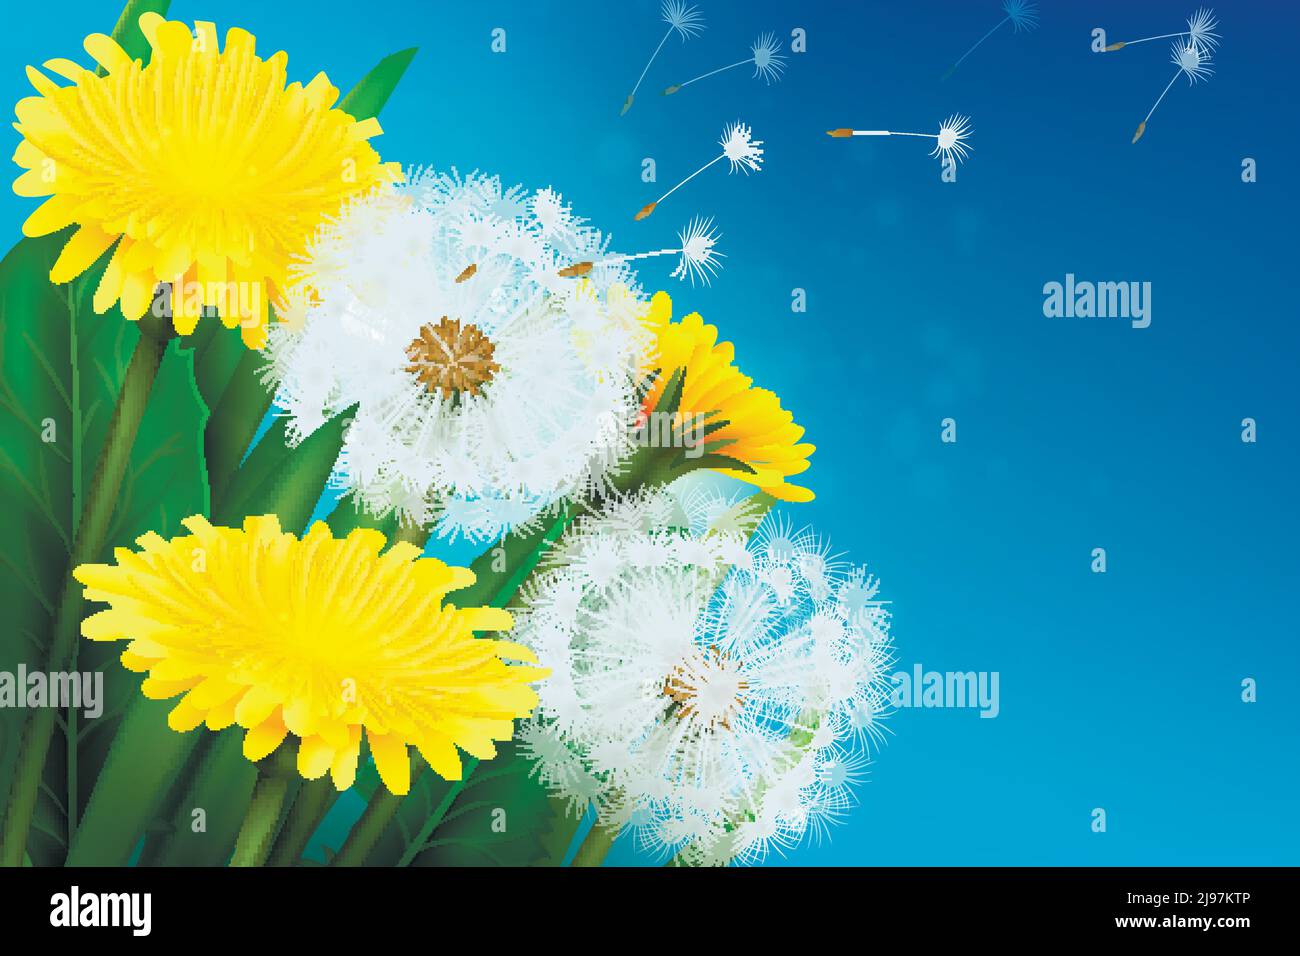 Realistic blooming dandelion and its flying seeds on blue background vector illustration Stock Vector